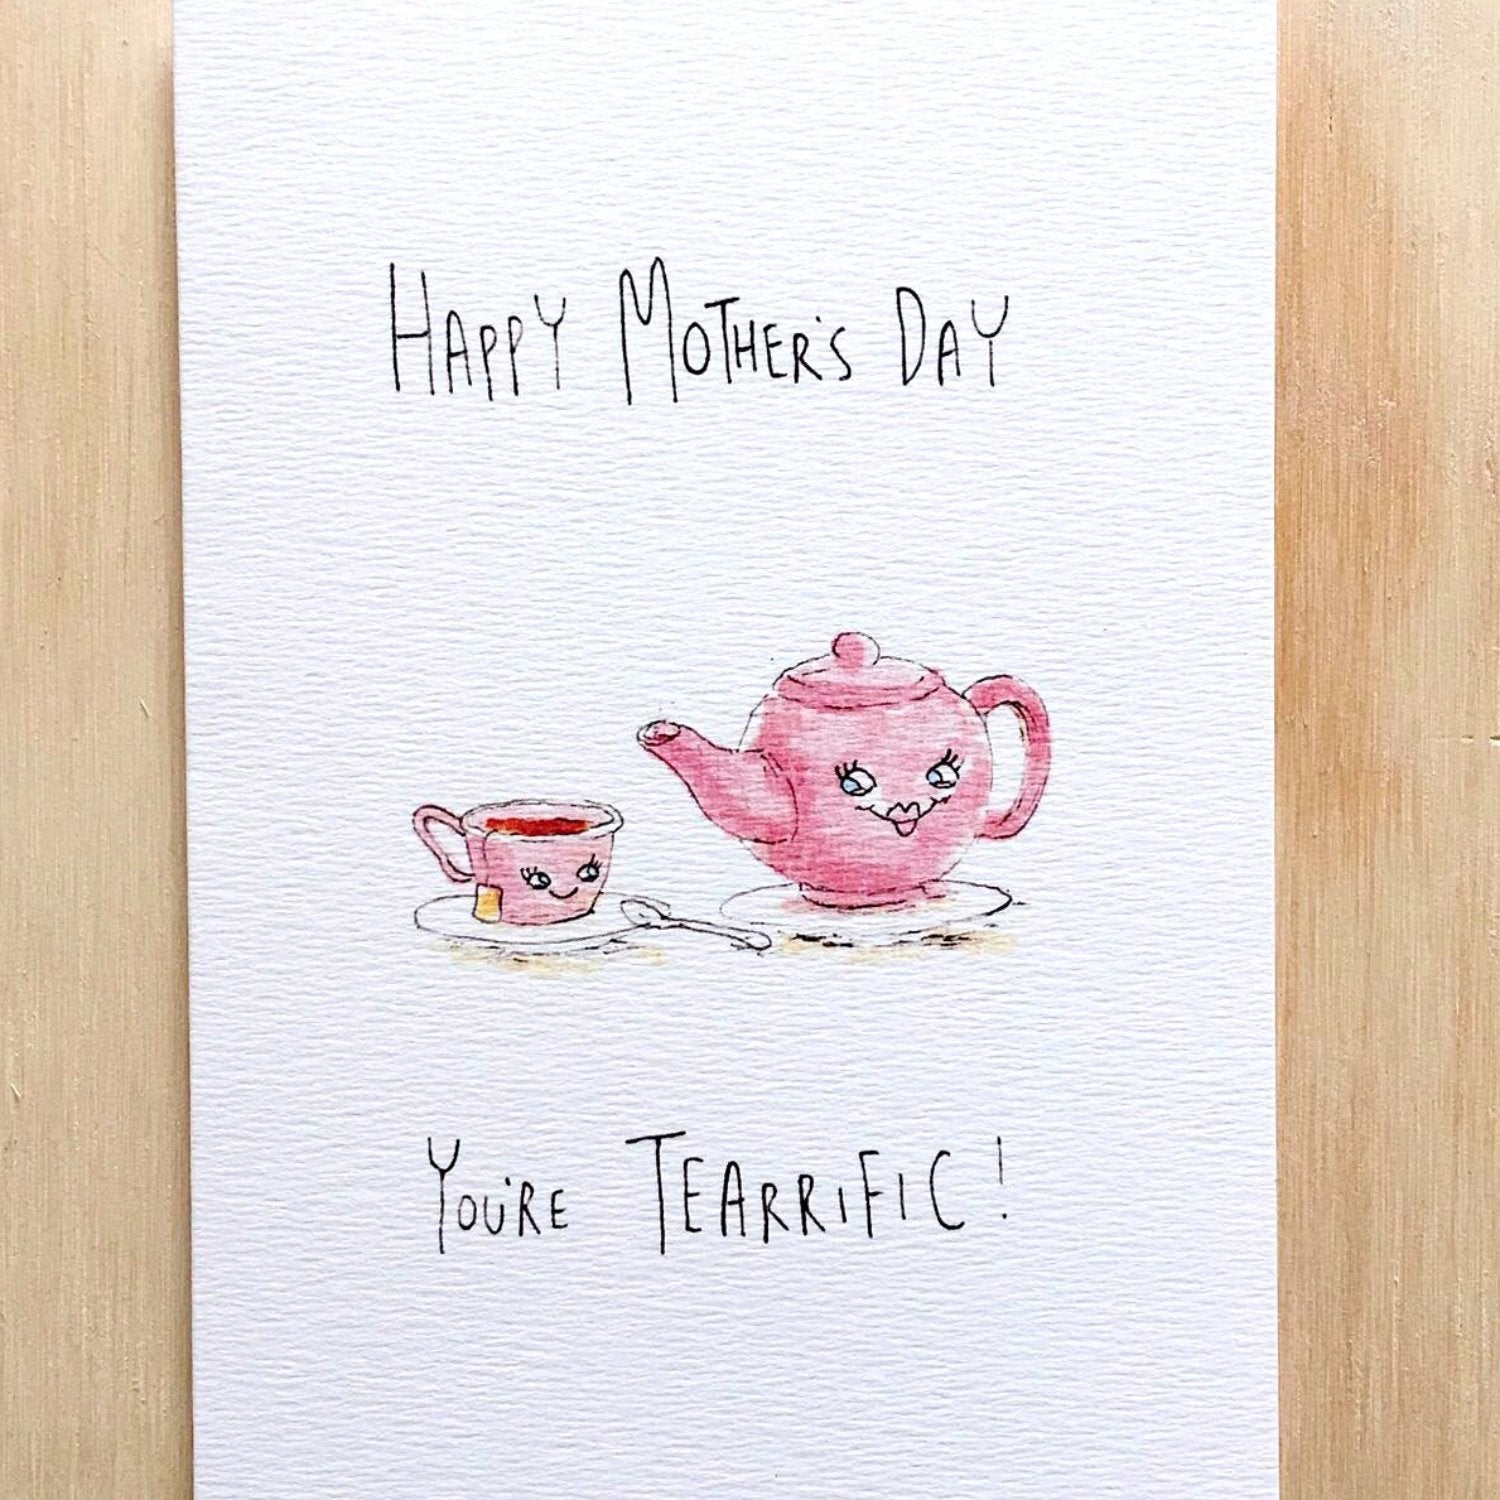 Happy Mother's Day, You're Tearrific - Well Drawn